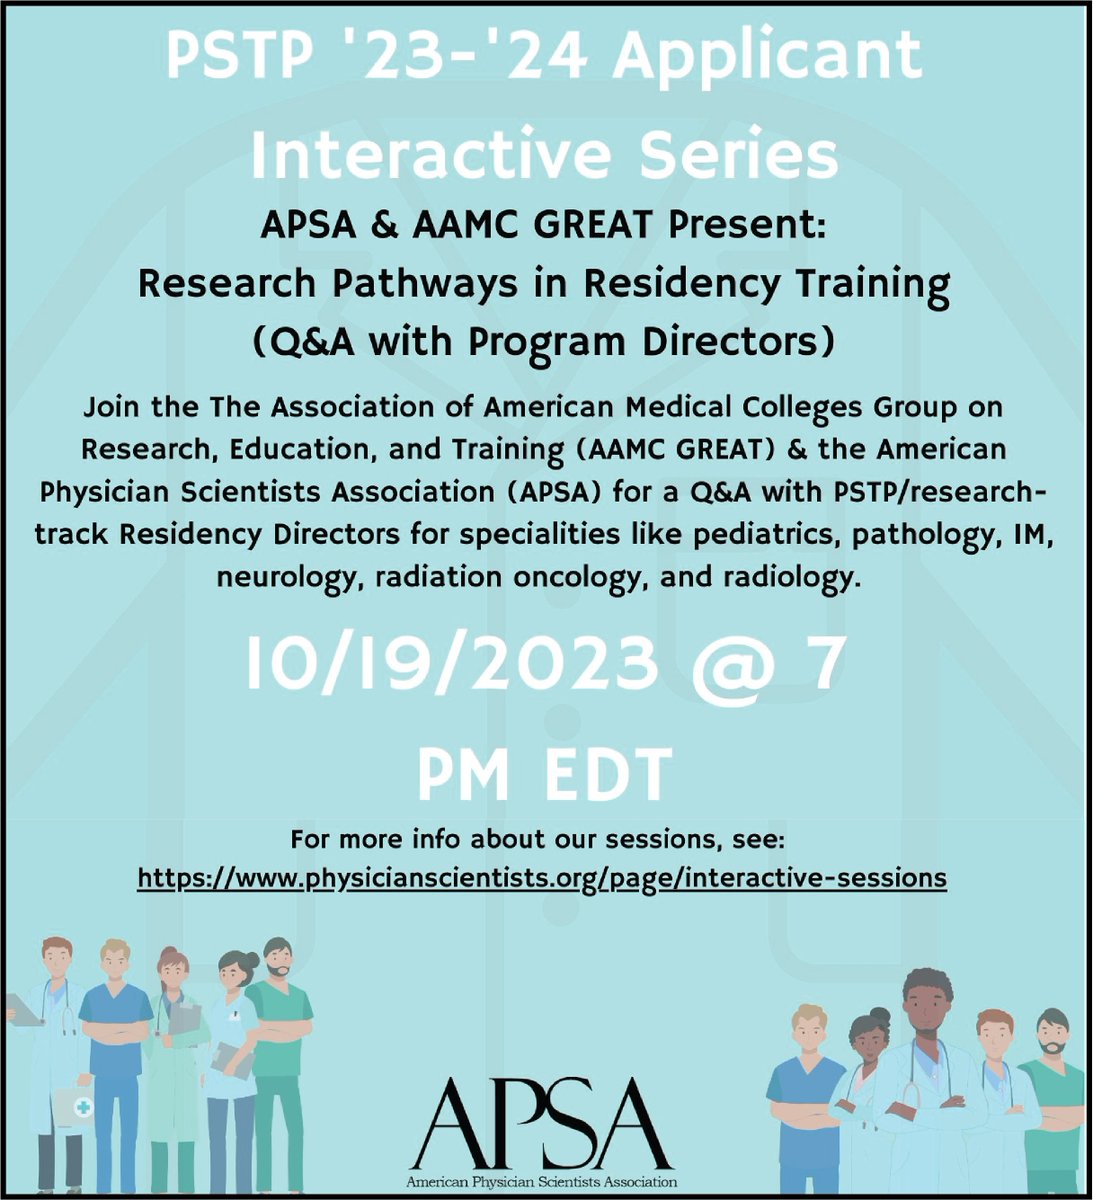 Join @A_P_S_A and the @AAMCtoday this Thursday Oct 19 at 7pm to learn about #research in #residency directly from program directors! Register here for free: physicianscientists.org/events/registe… #Match2024 #physicianscientists #researchinresidency